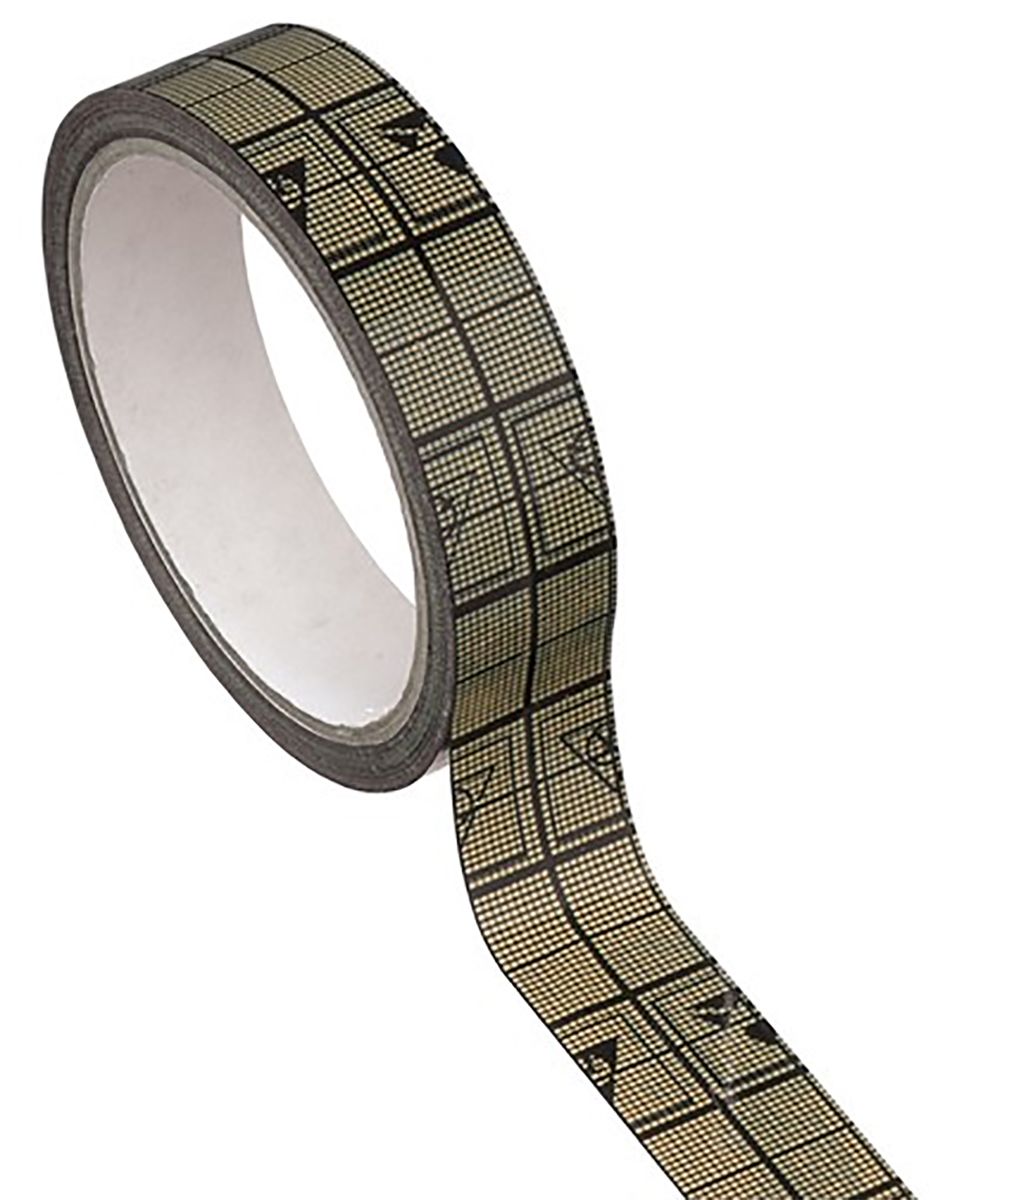 48mm x 36m ESD Tape